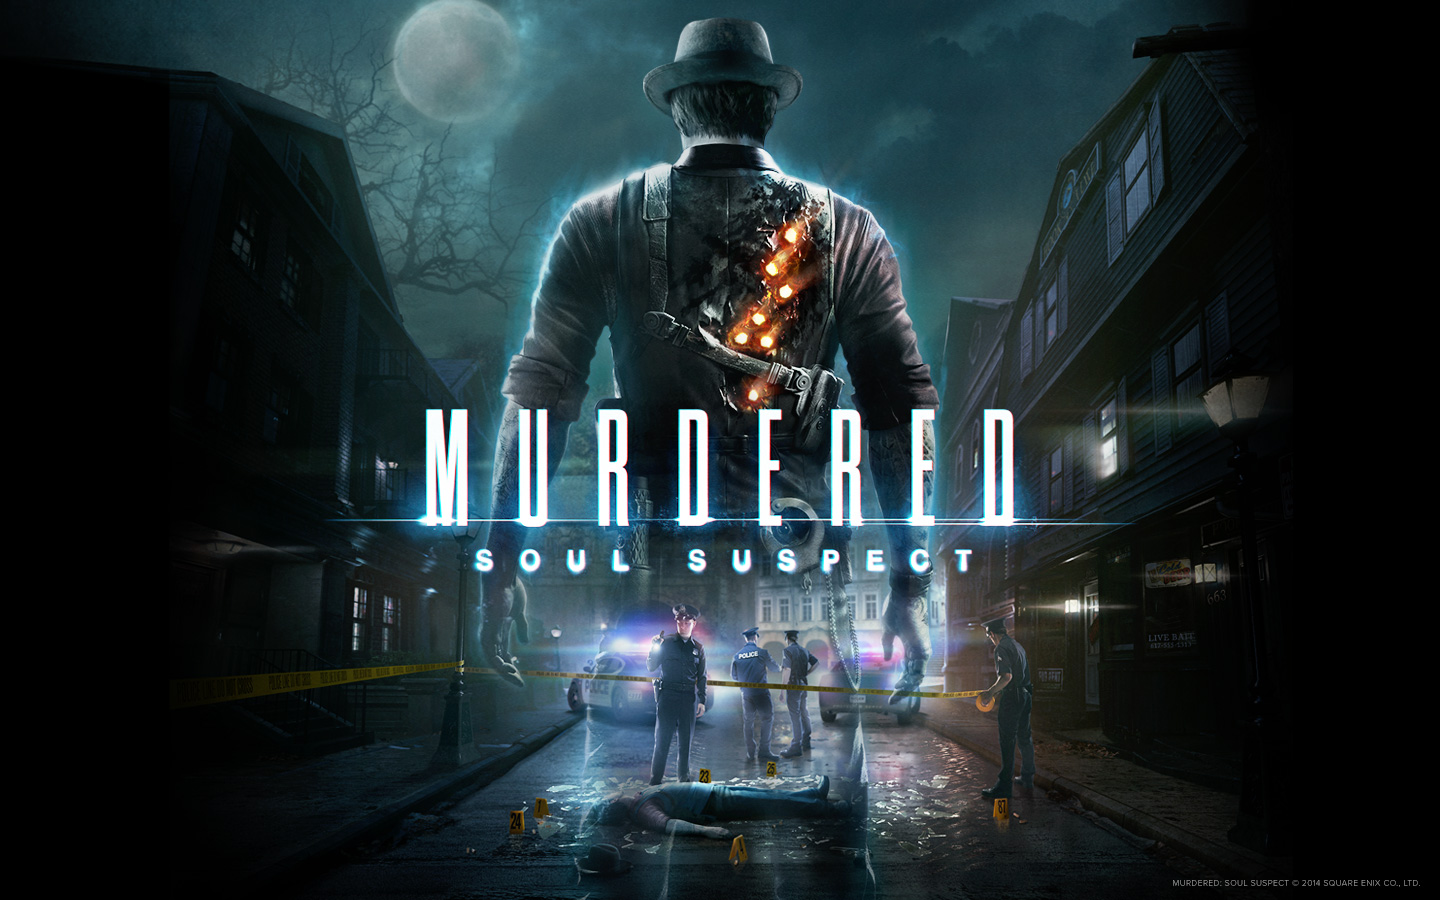 Second Bowl: Murdered Soul Suspect